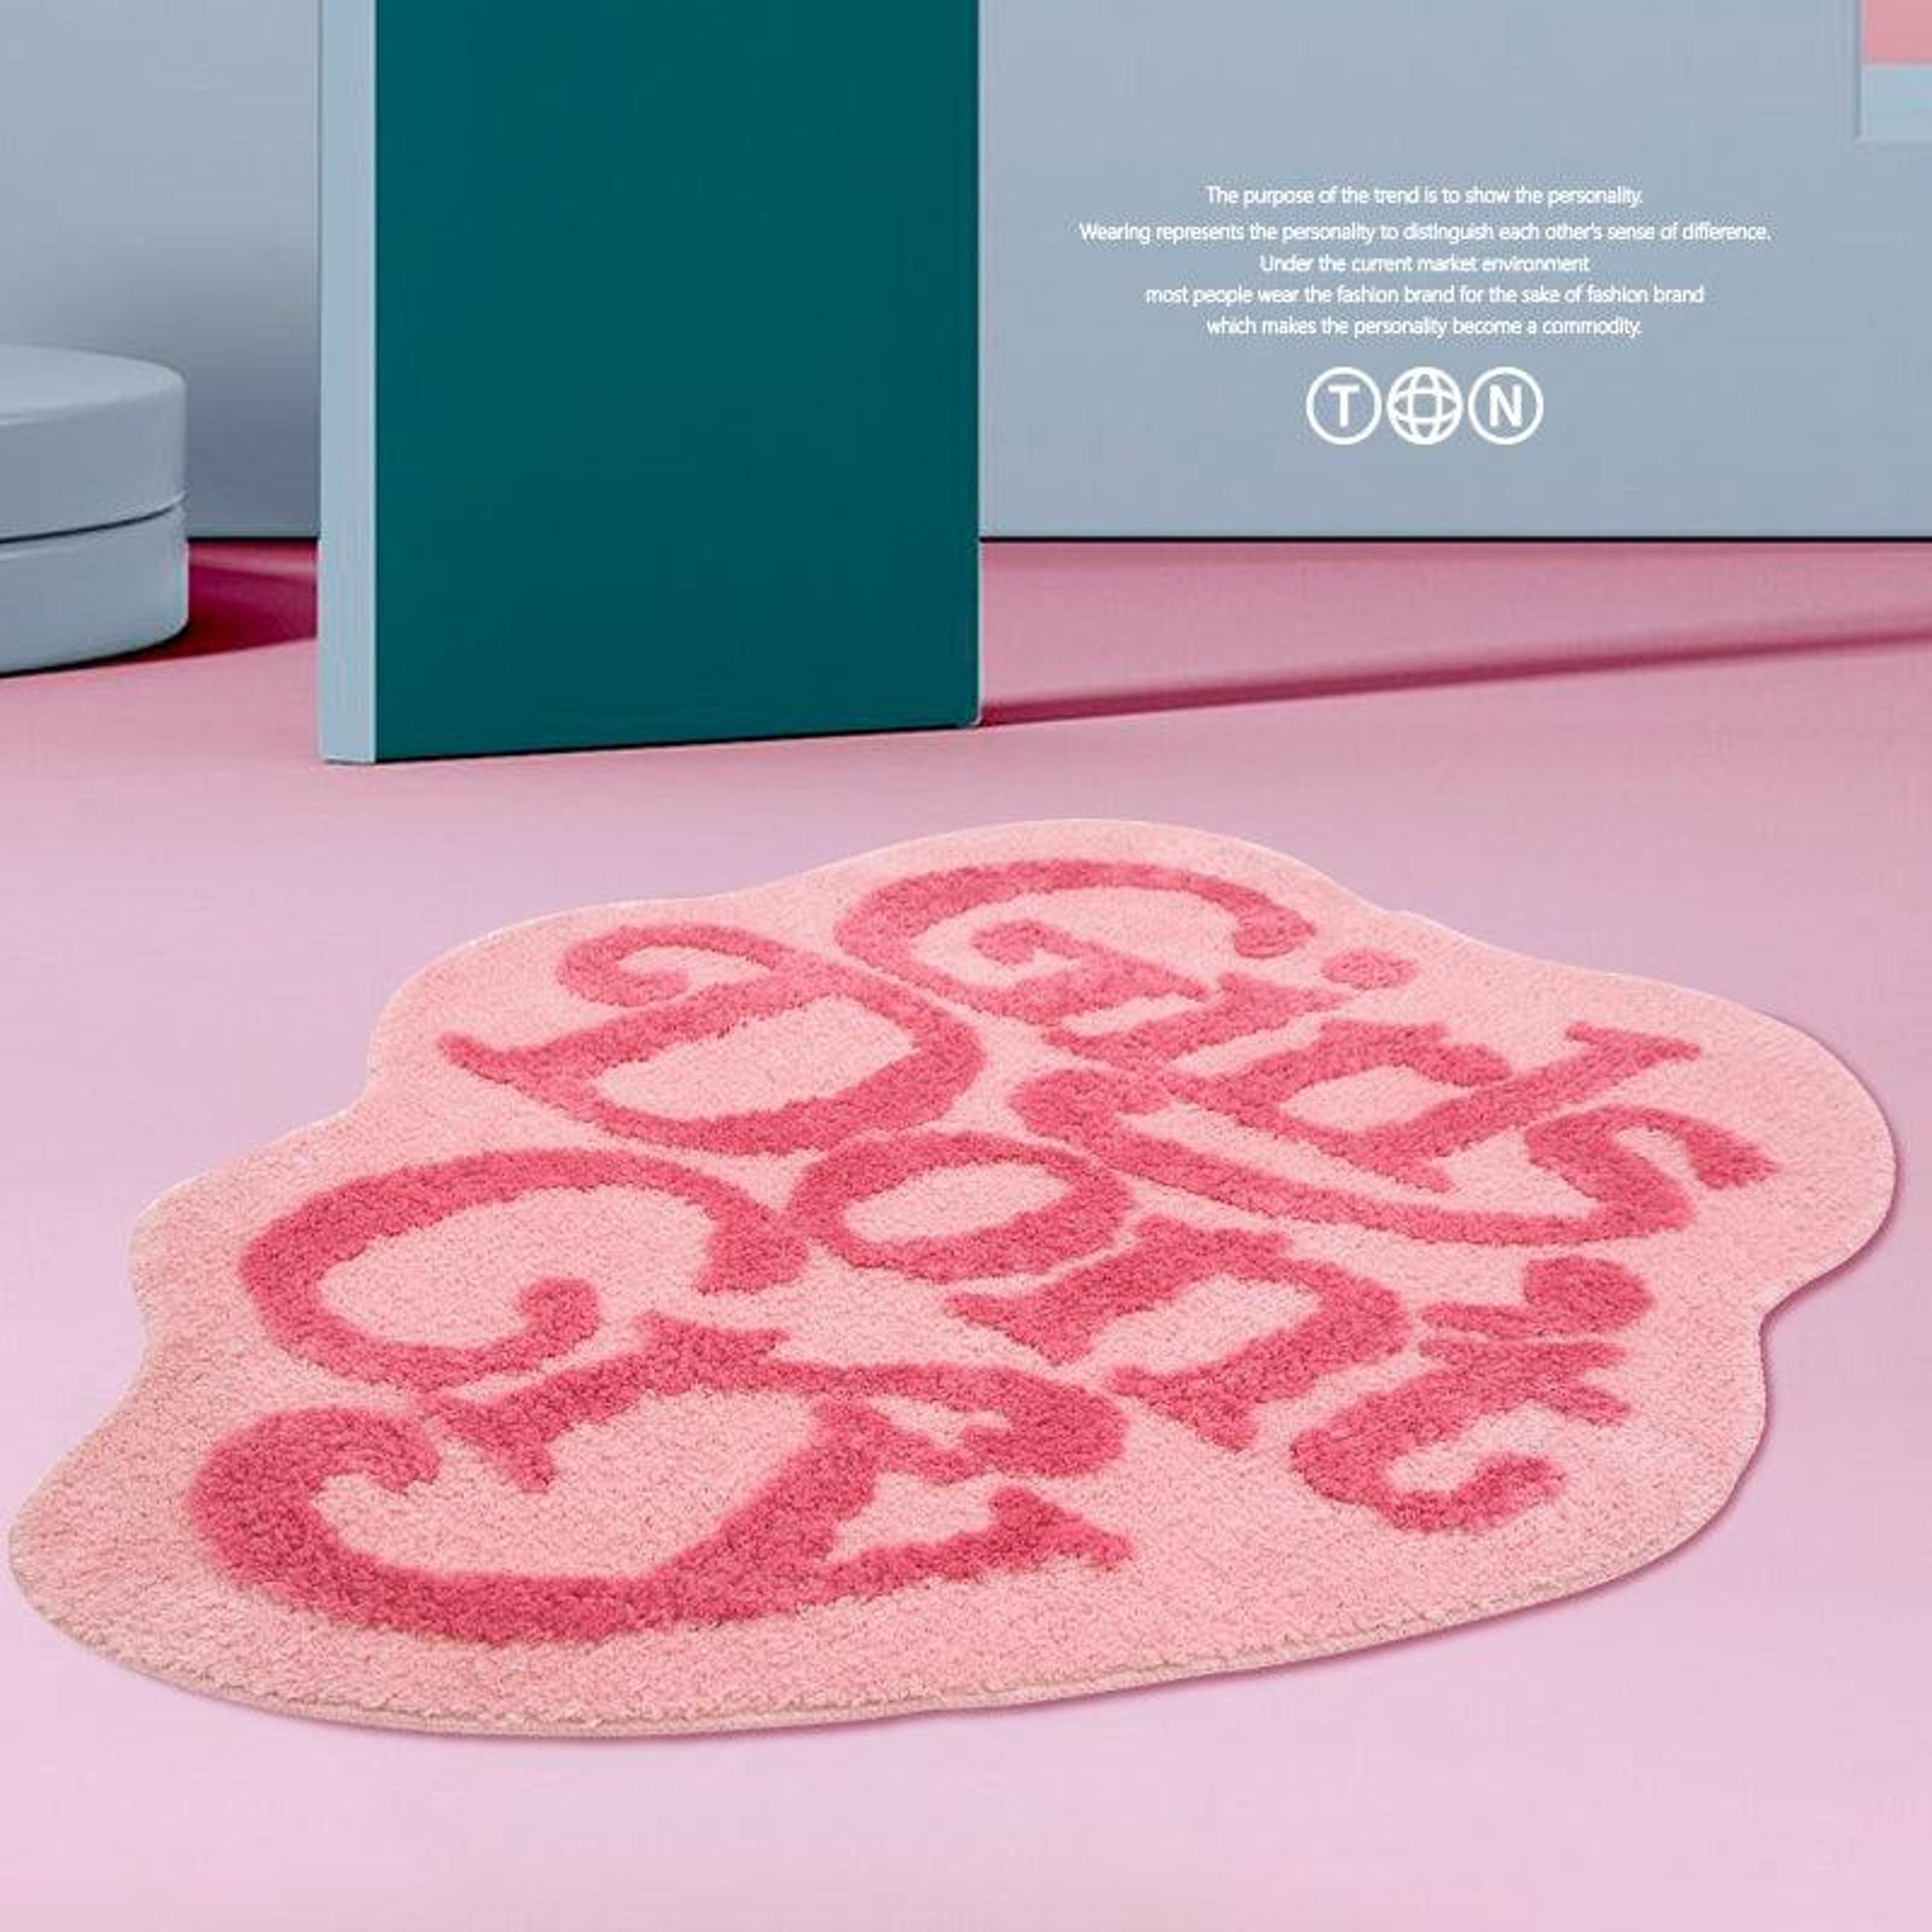 Alternate View 4 of Girls Don’t Cry Rug Pink